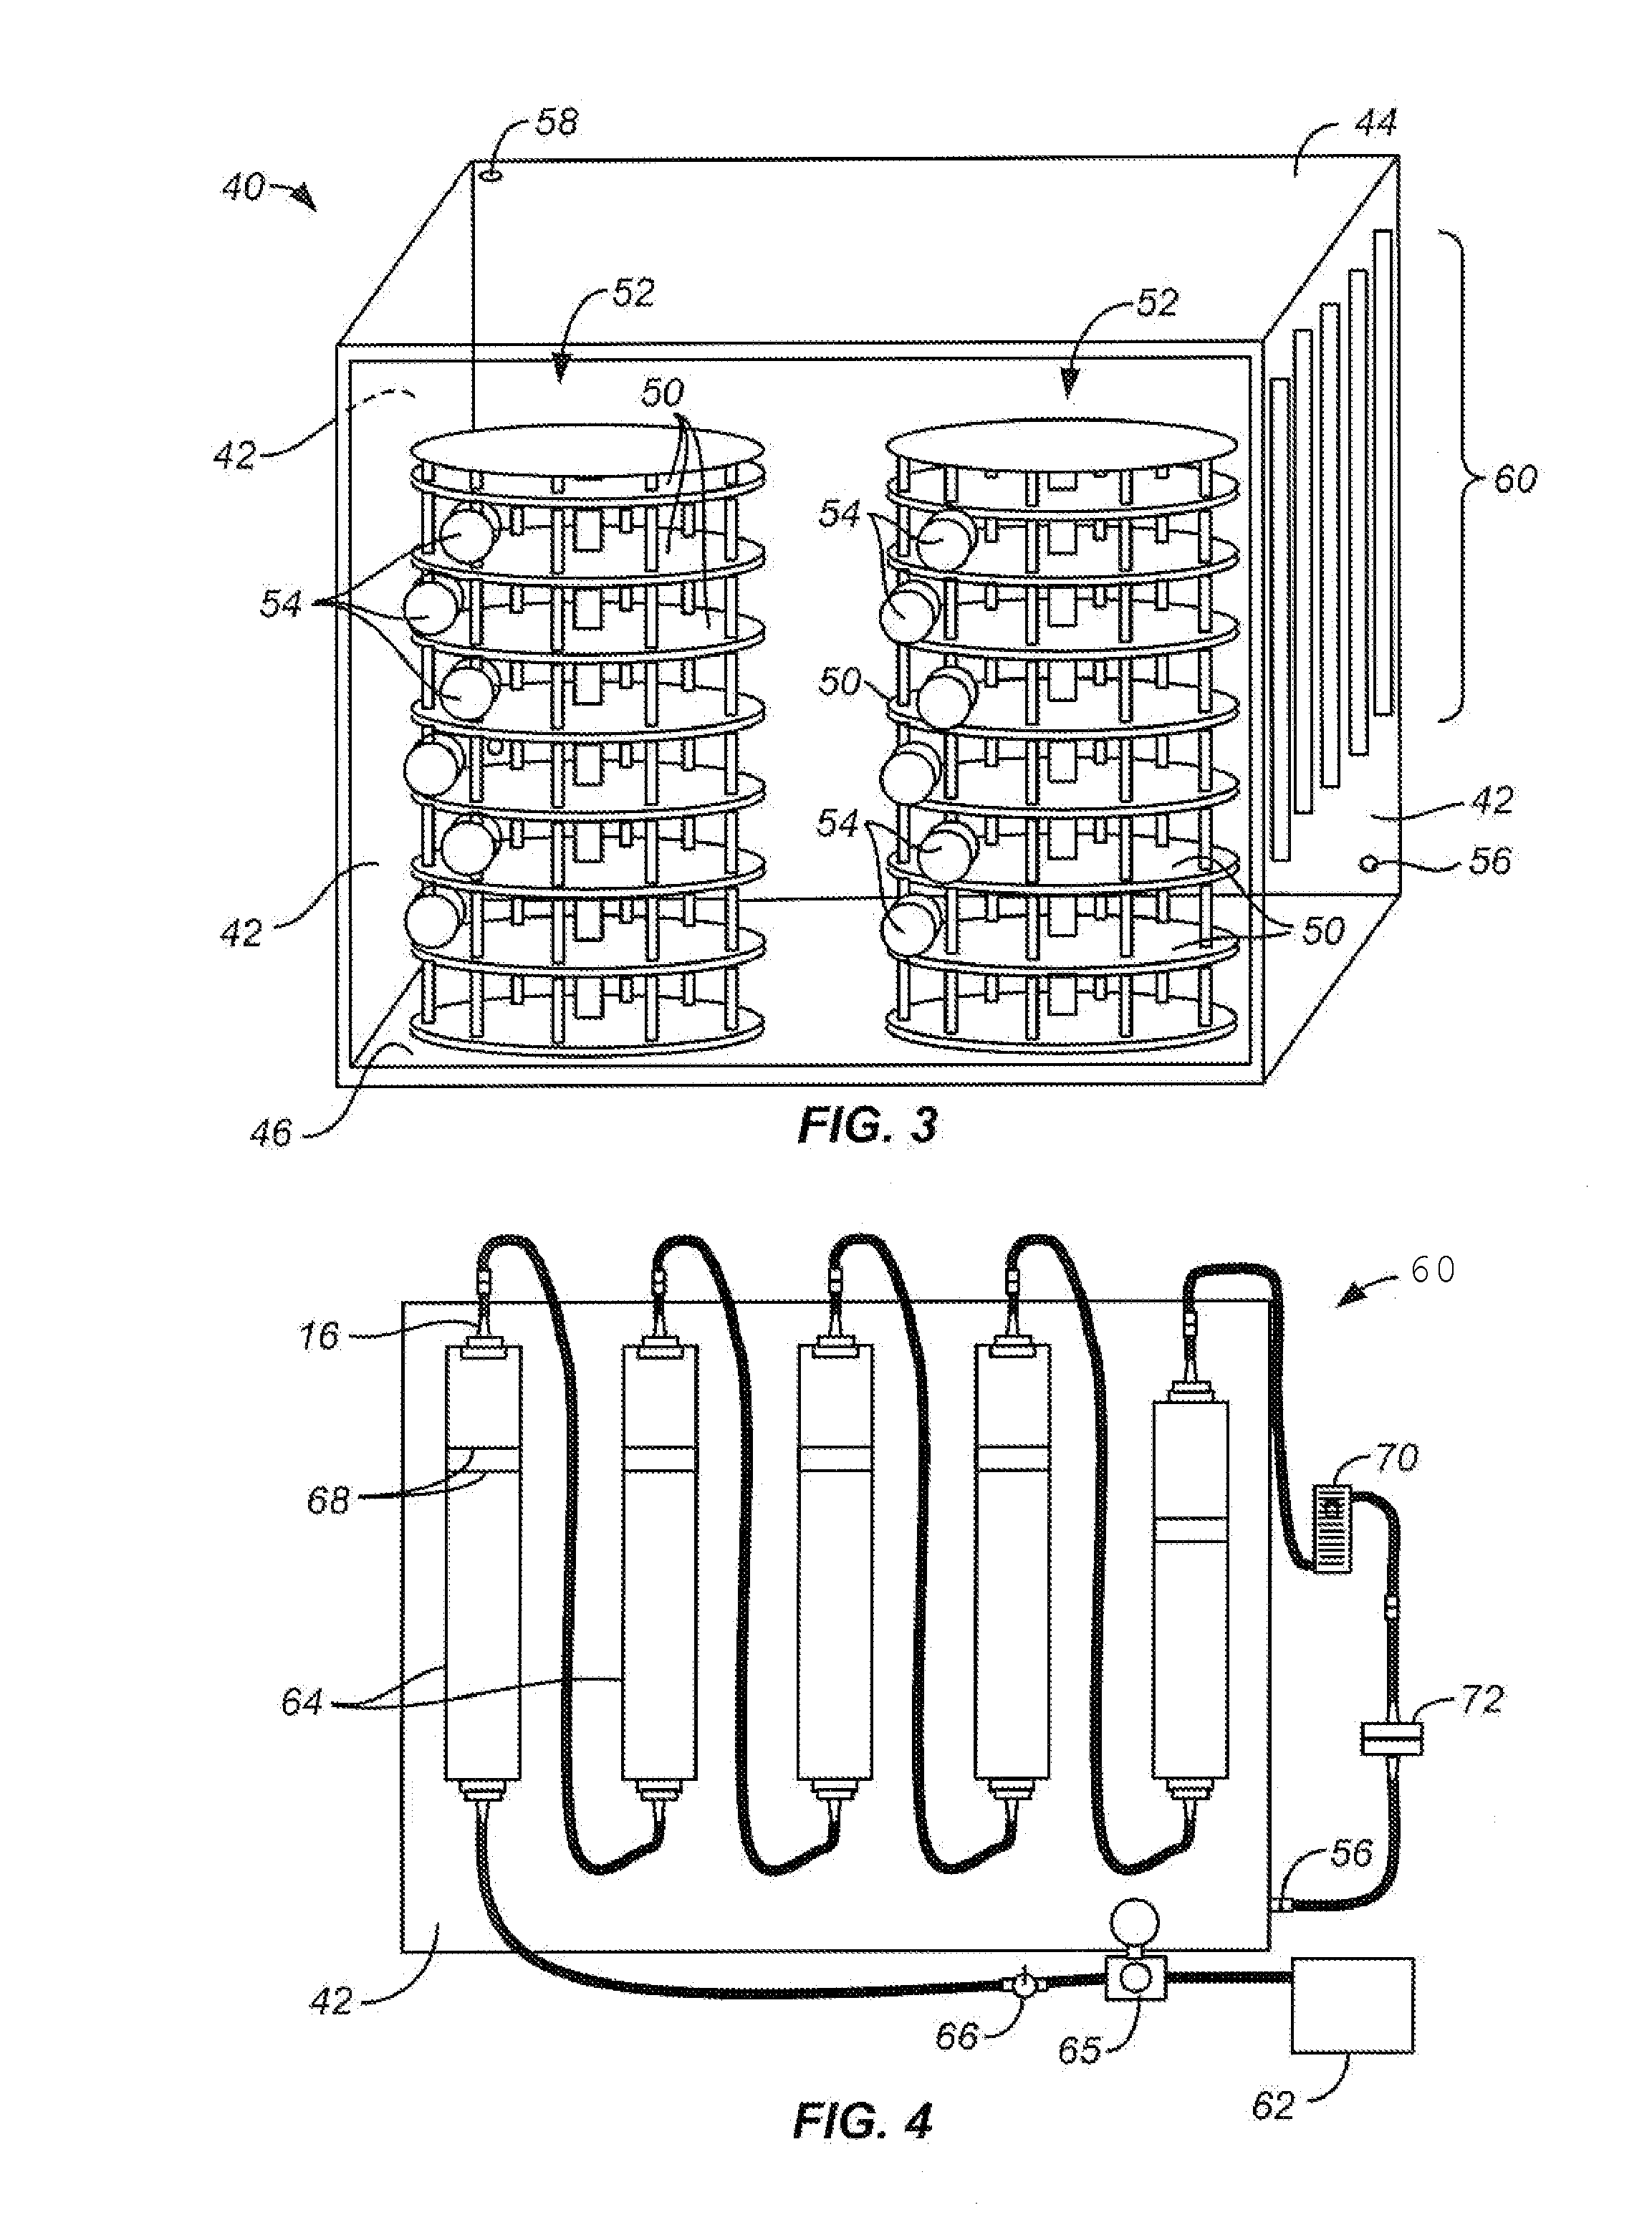 METHODS AND SYSTEMS FOR ADJUSTING THE pH OF MEDICAL BUFFERING SOLUTIONS